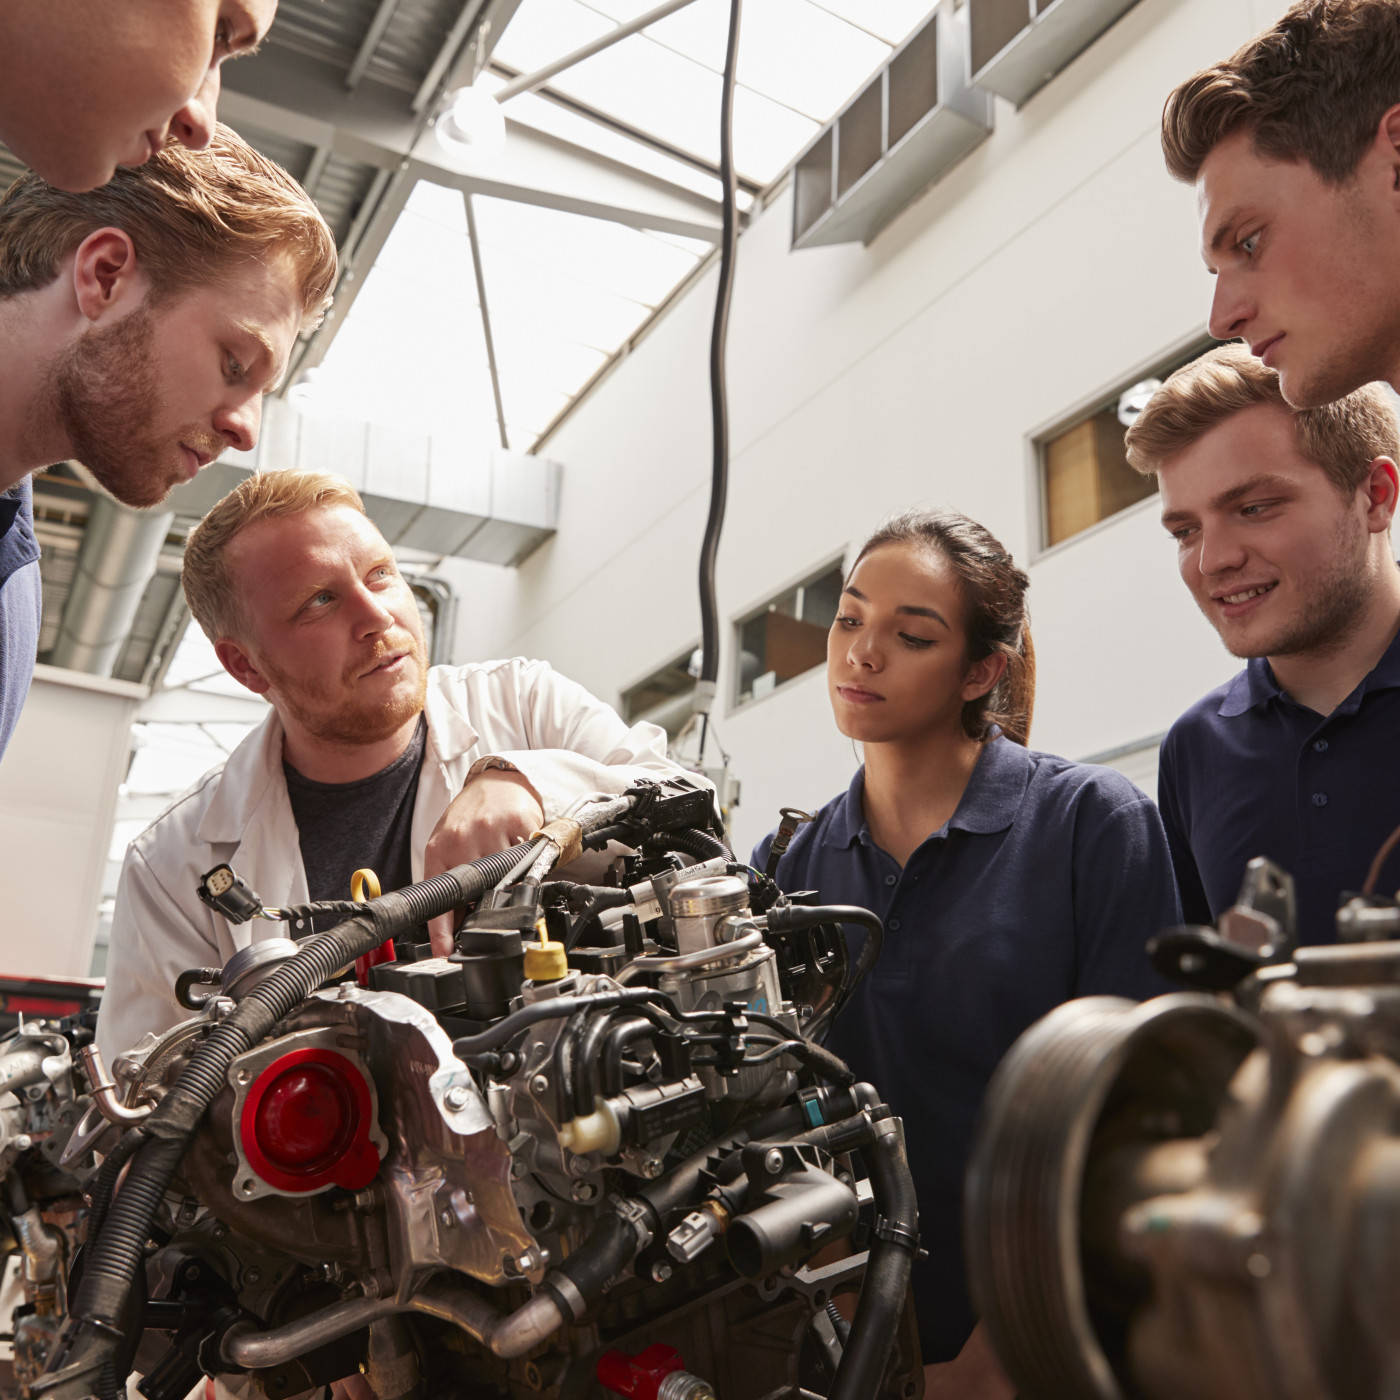 Group of interns working on engine